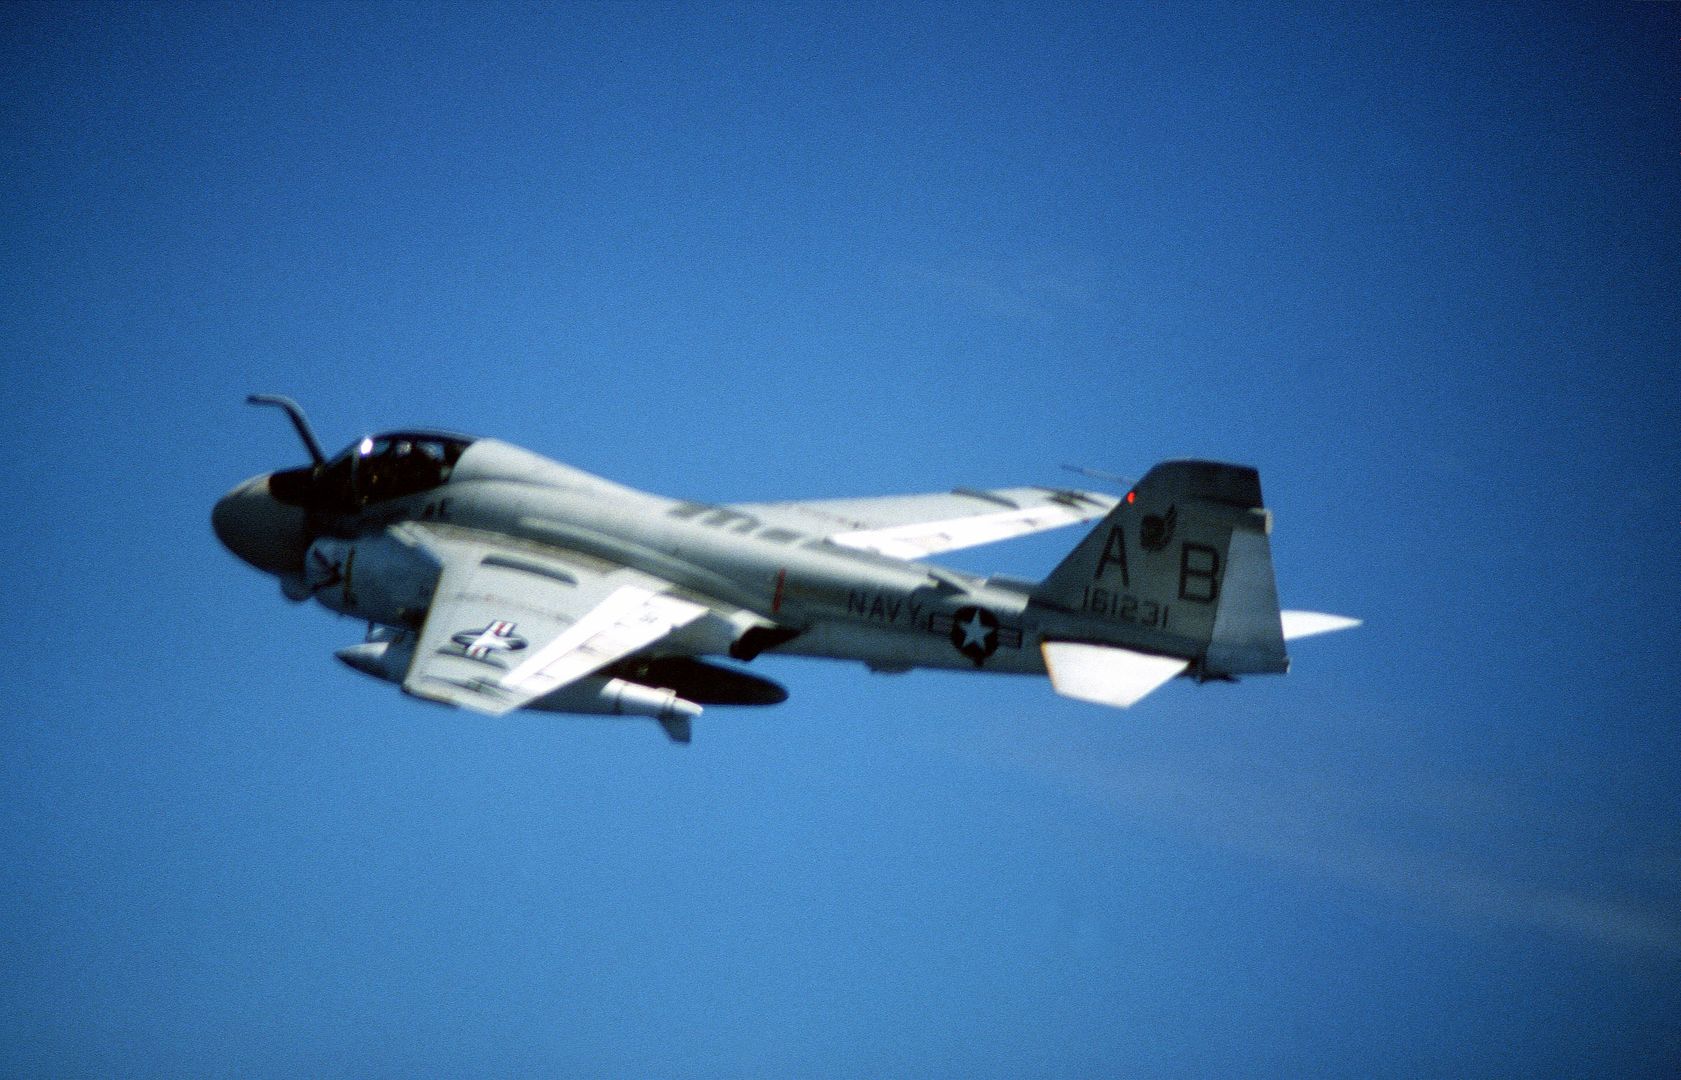 An Air To Air Left Side View Of An A 6 Intruder Aircraft Assigned To The Aircraft Carrier USS AMERICA